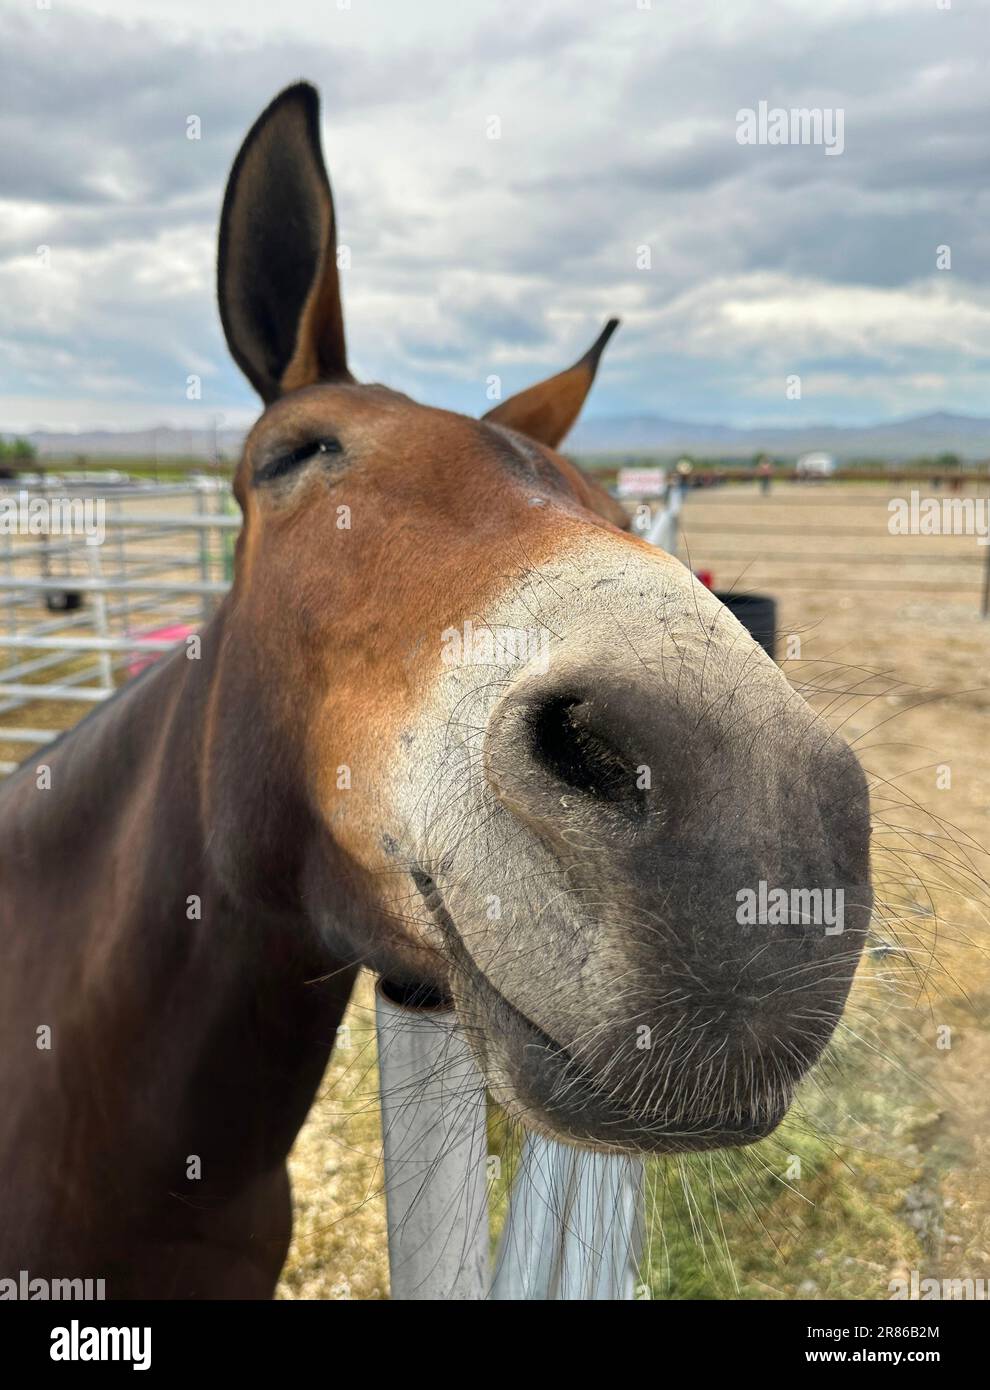 Mule closeup face with a smile looks at you from the  horse farm. Its a funny view that you see on a mule, a grin at the camera. Stock Photo